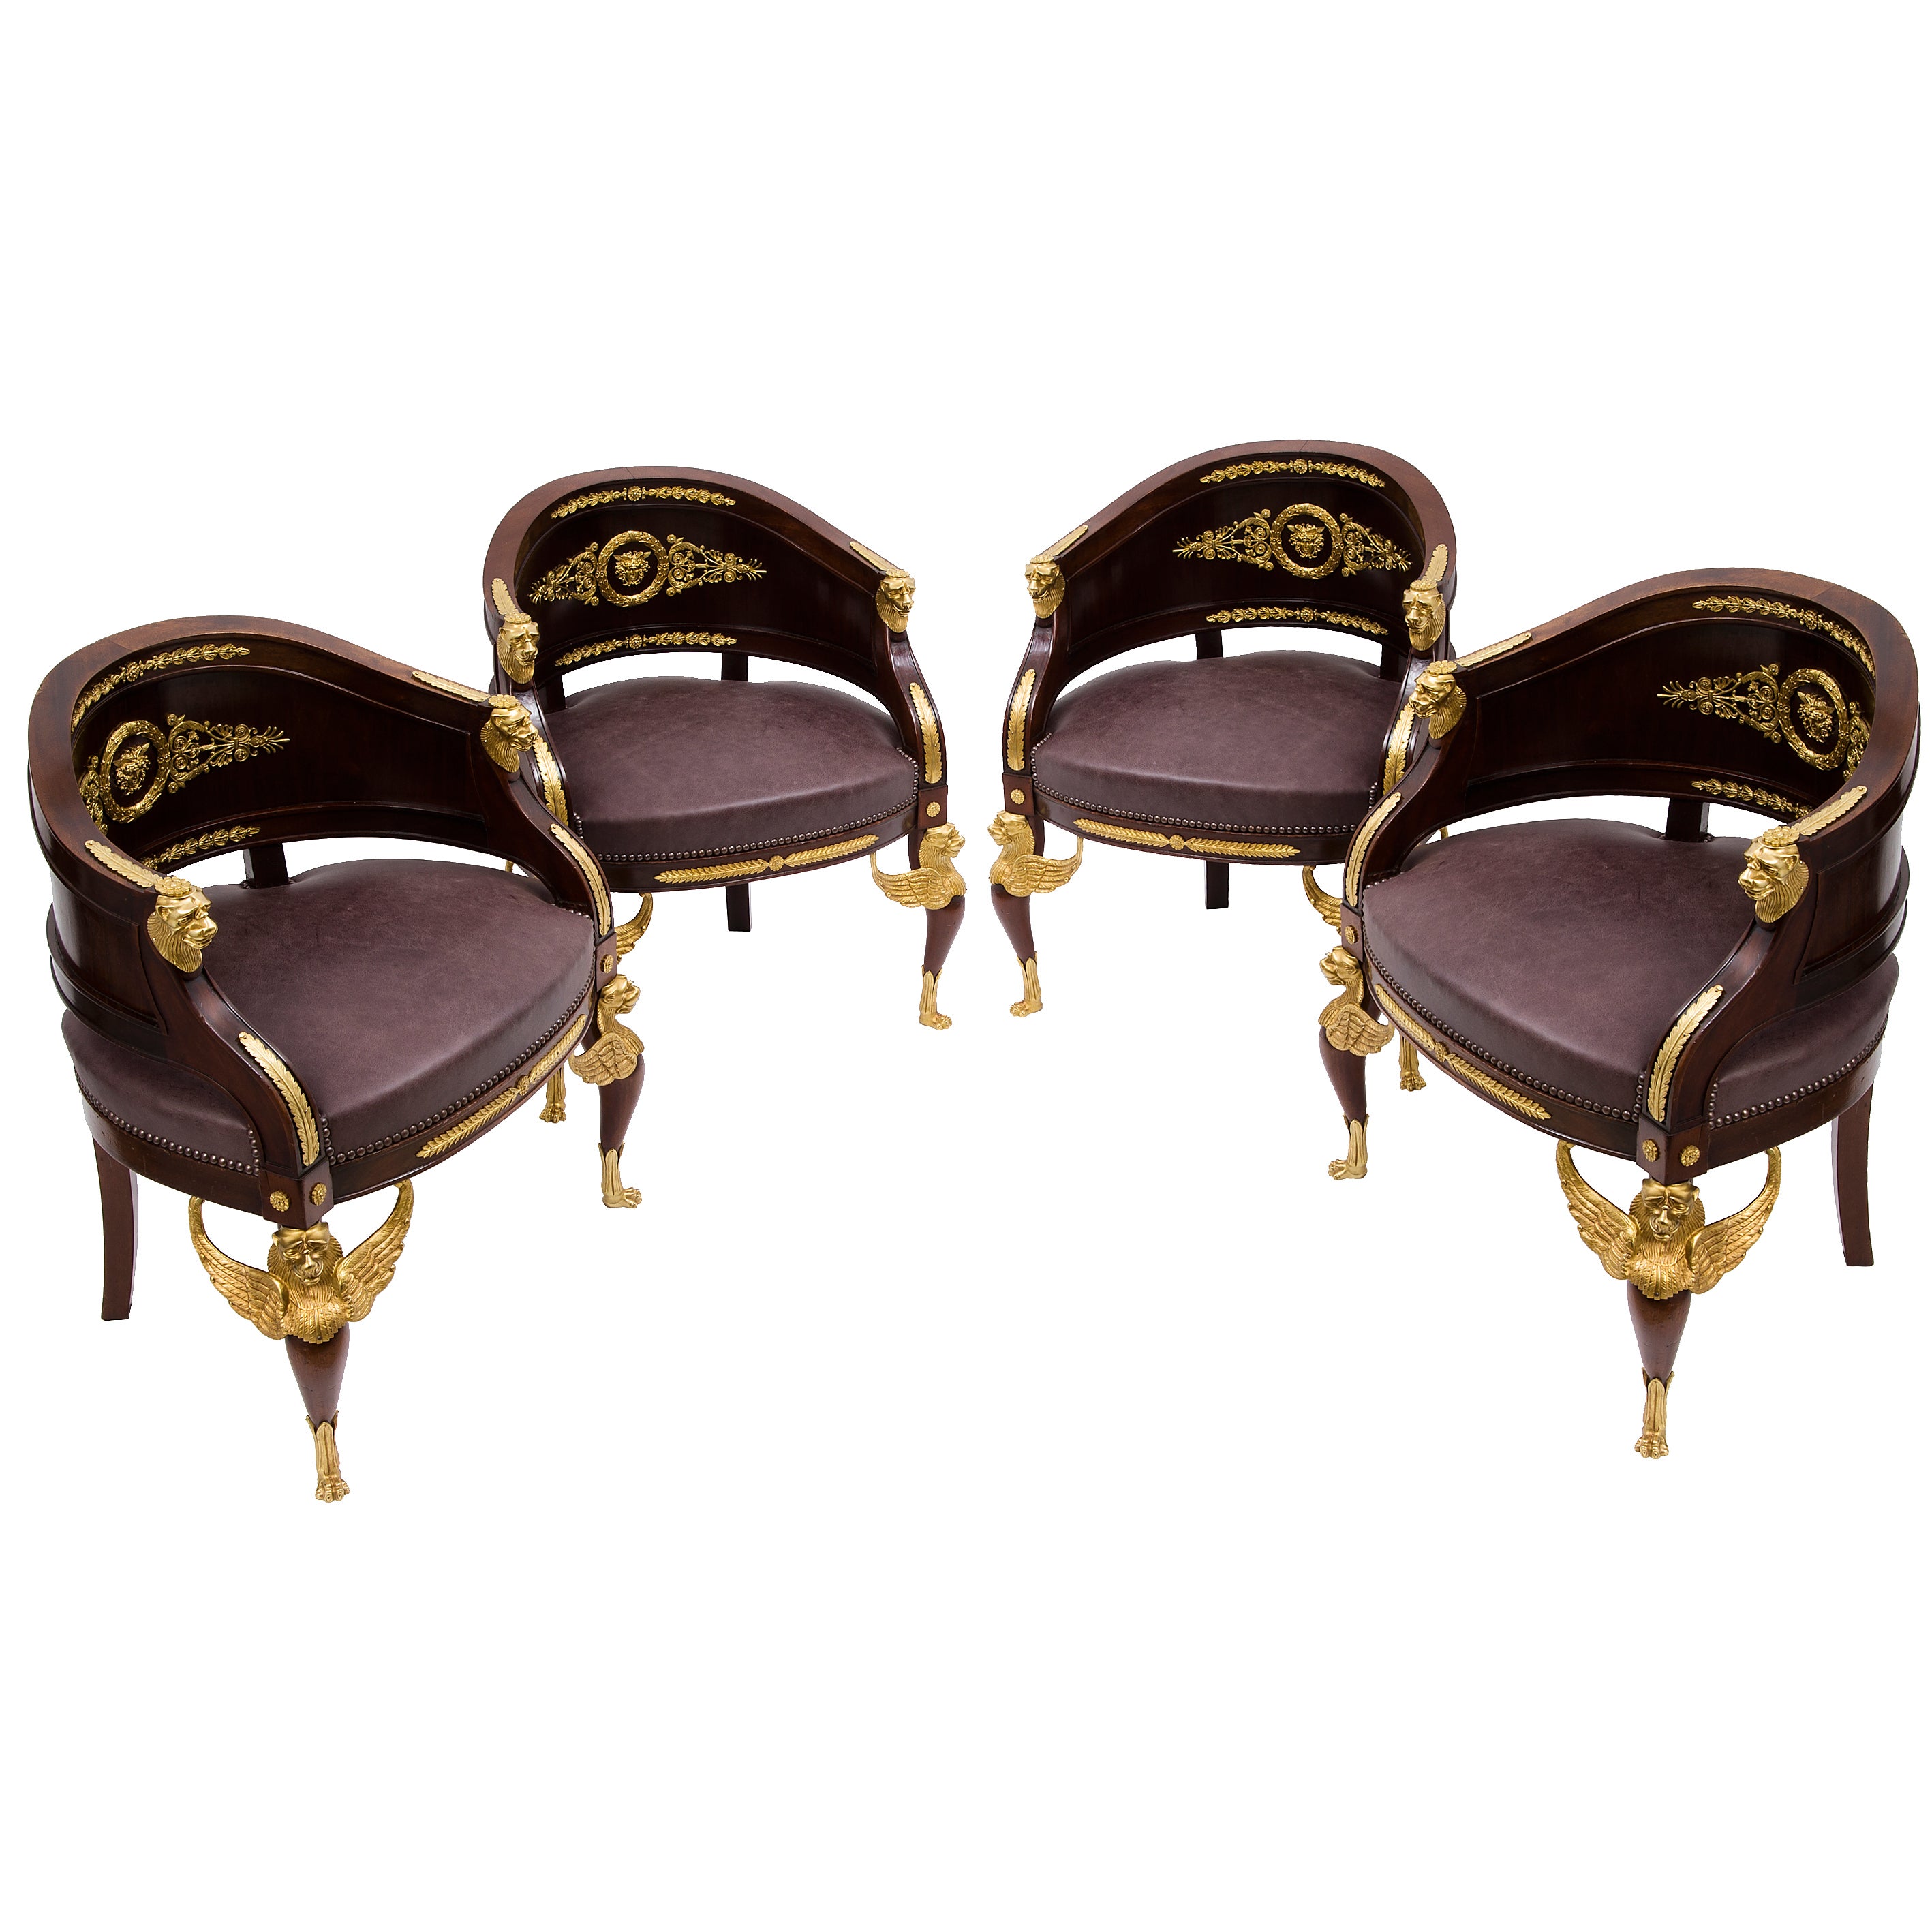 Magnificent Set of Four French Napoleon III Empire Style Tub Chairs c.1870